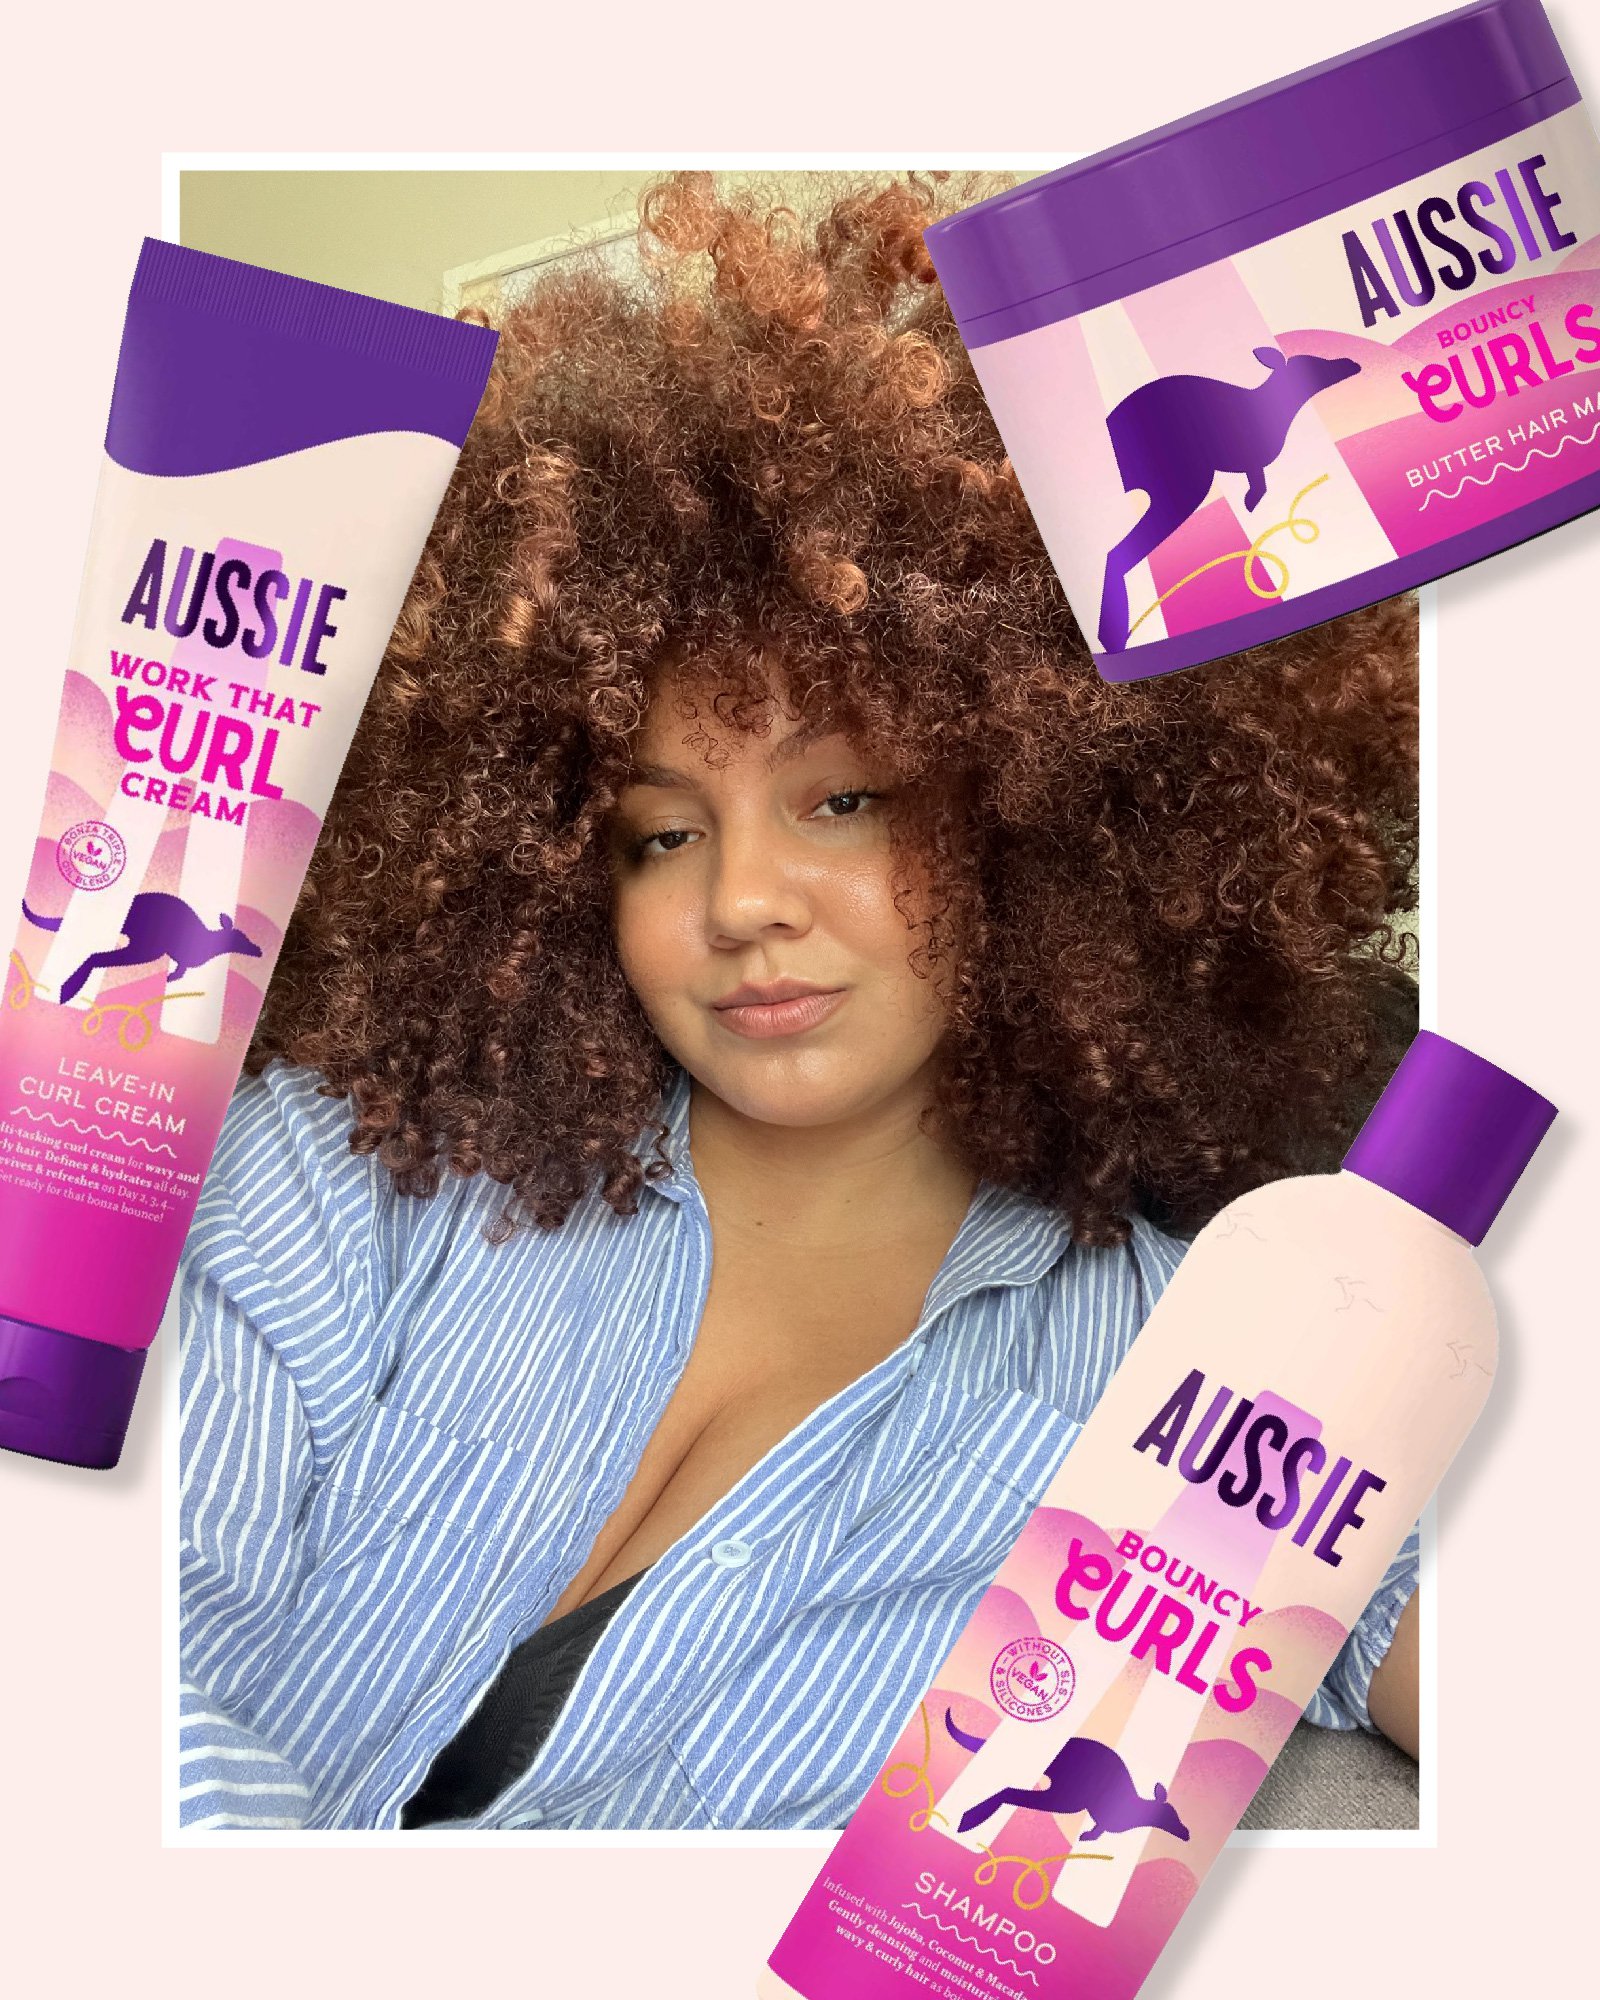 Aussie Bouncy Curls Review: I Tried The New Affordable Curly Hair Range